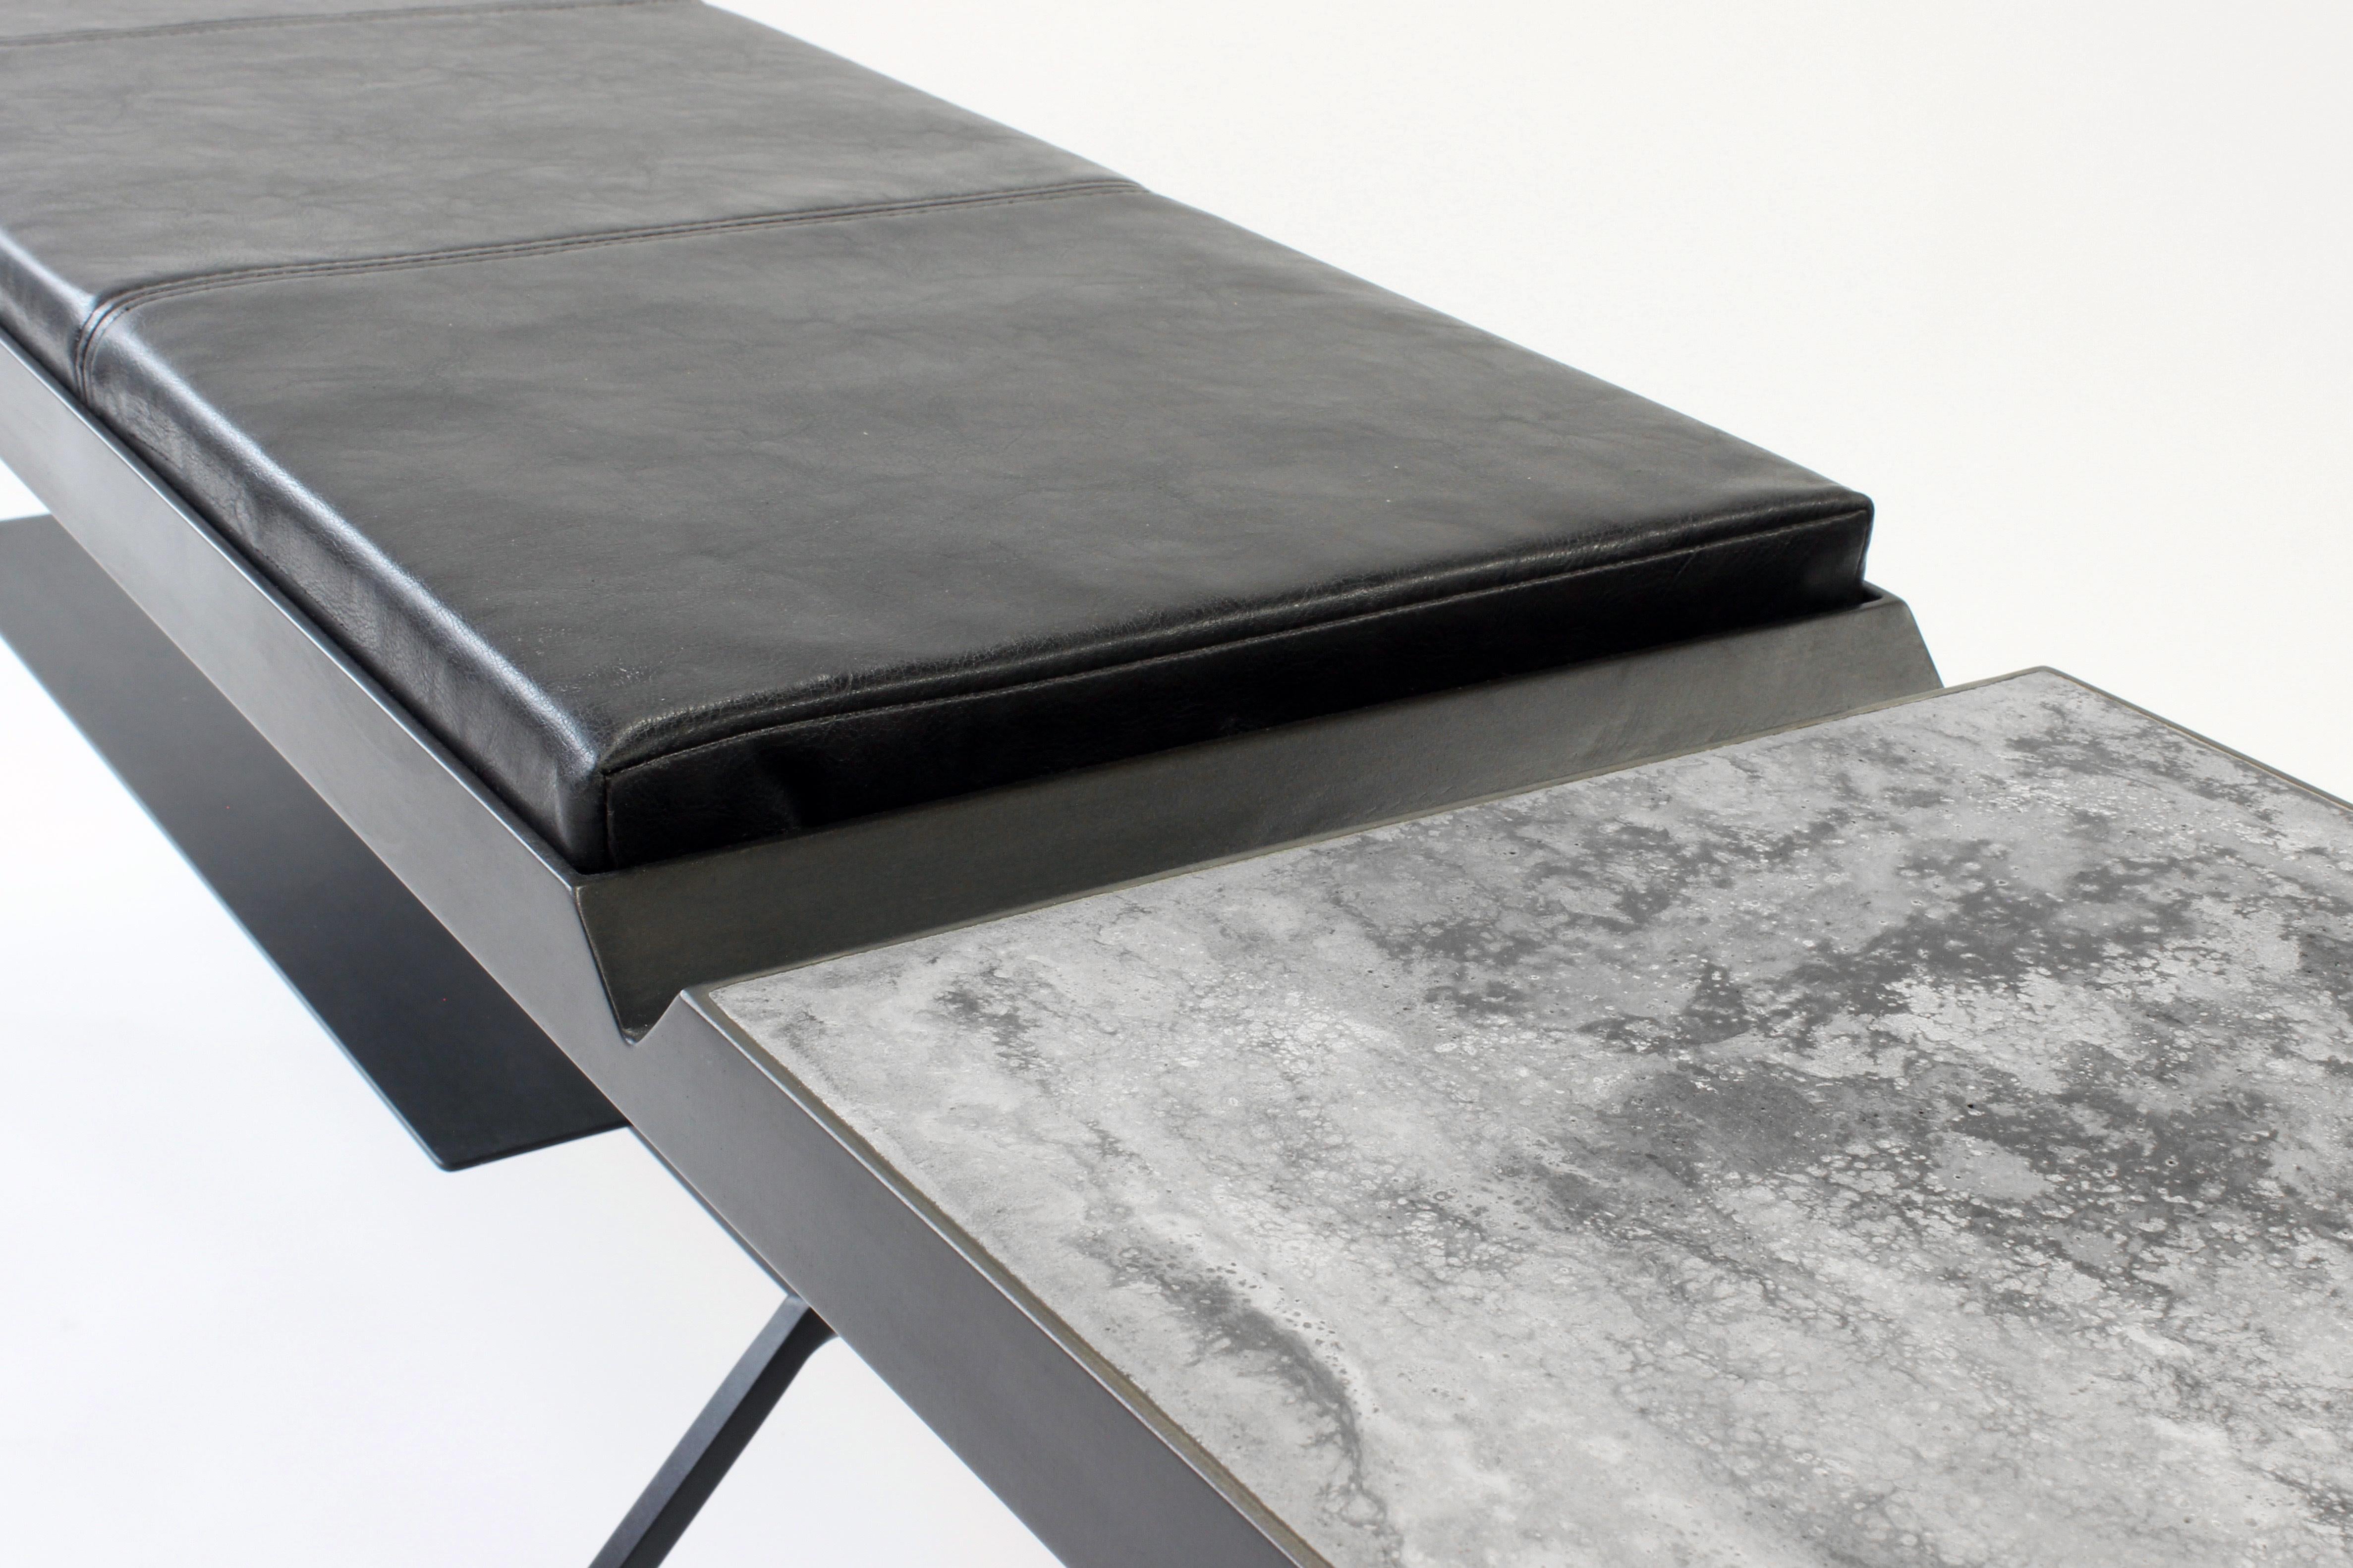 The Grey-Bird bench from Joshua Howe Design combines seating and a side table fluidly. An impossible steel “V” highlights the transition from poured concrete surface to faux leather cushion. An asymmetrical blackened steel frame with integrated